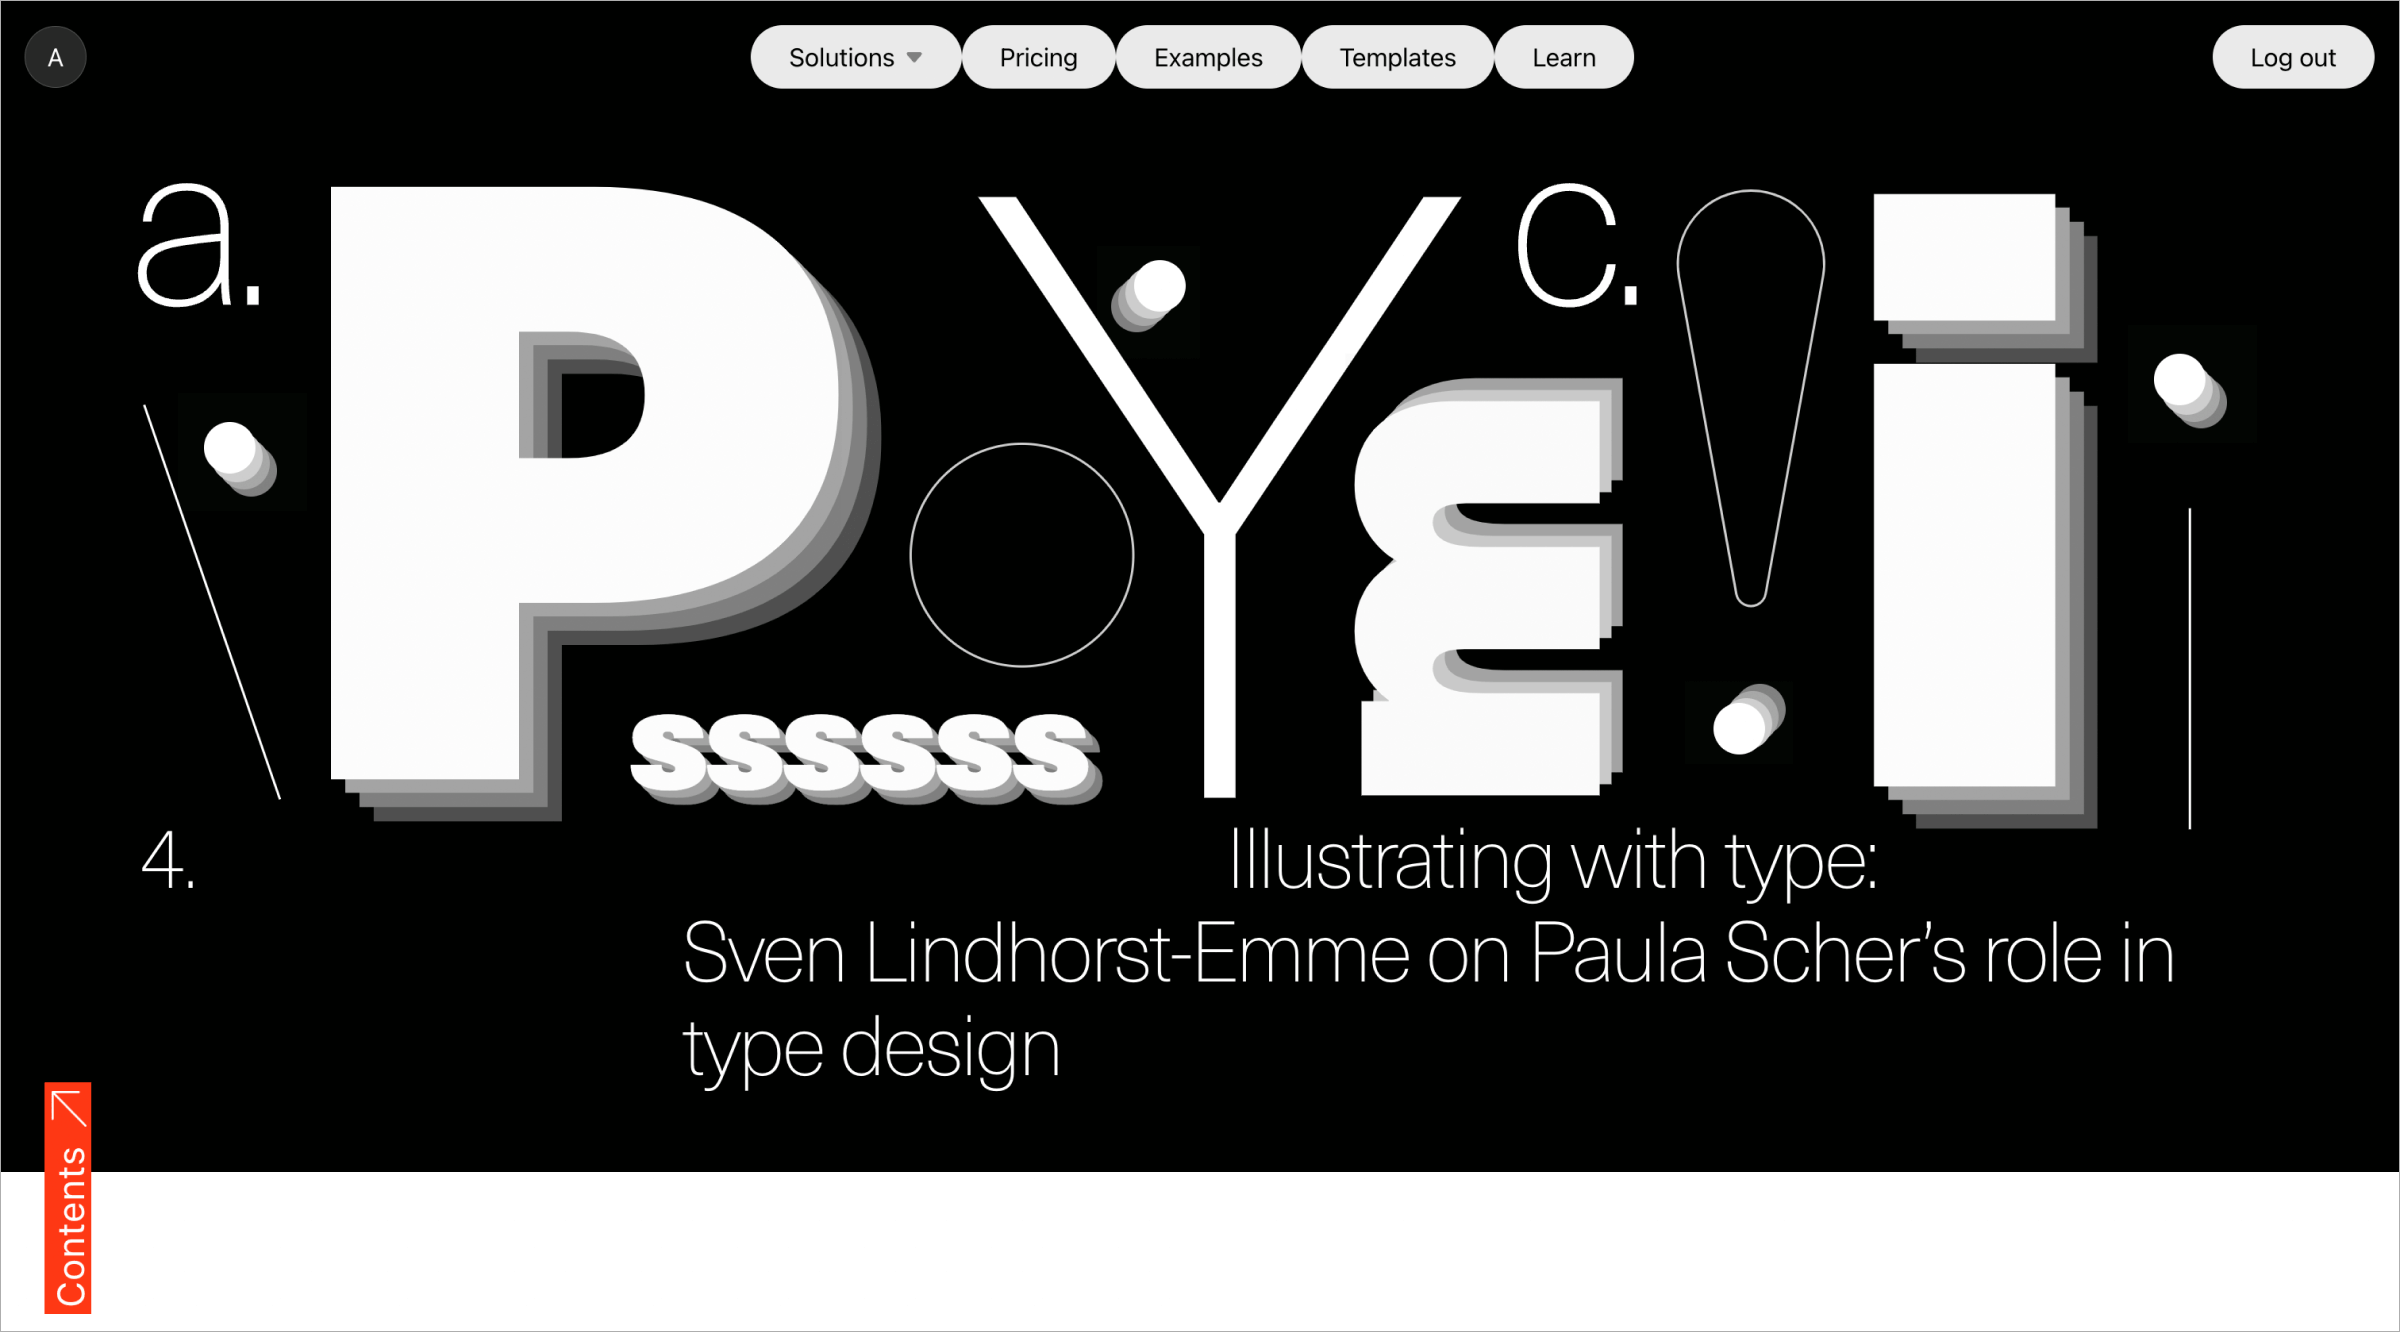 Screen shot from The Faces Behind Typefaces